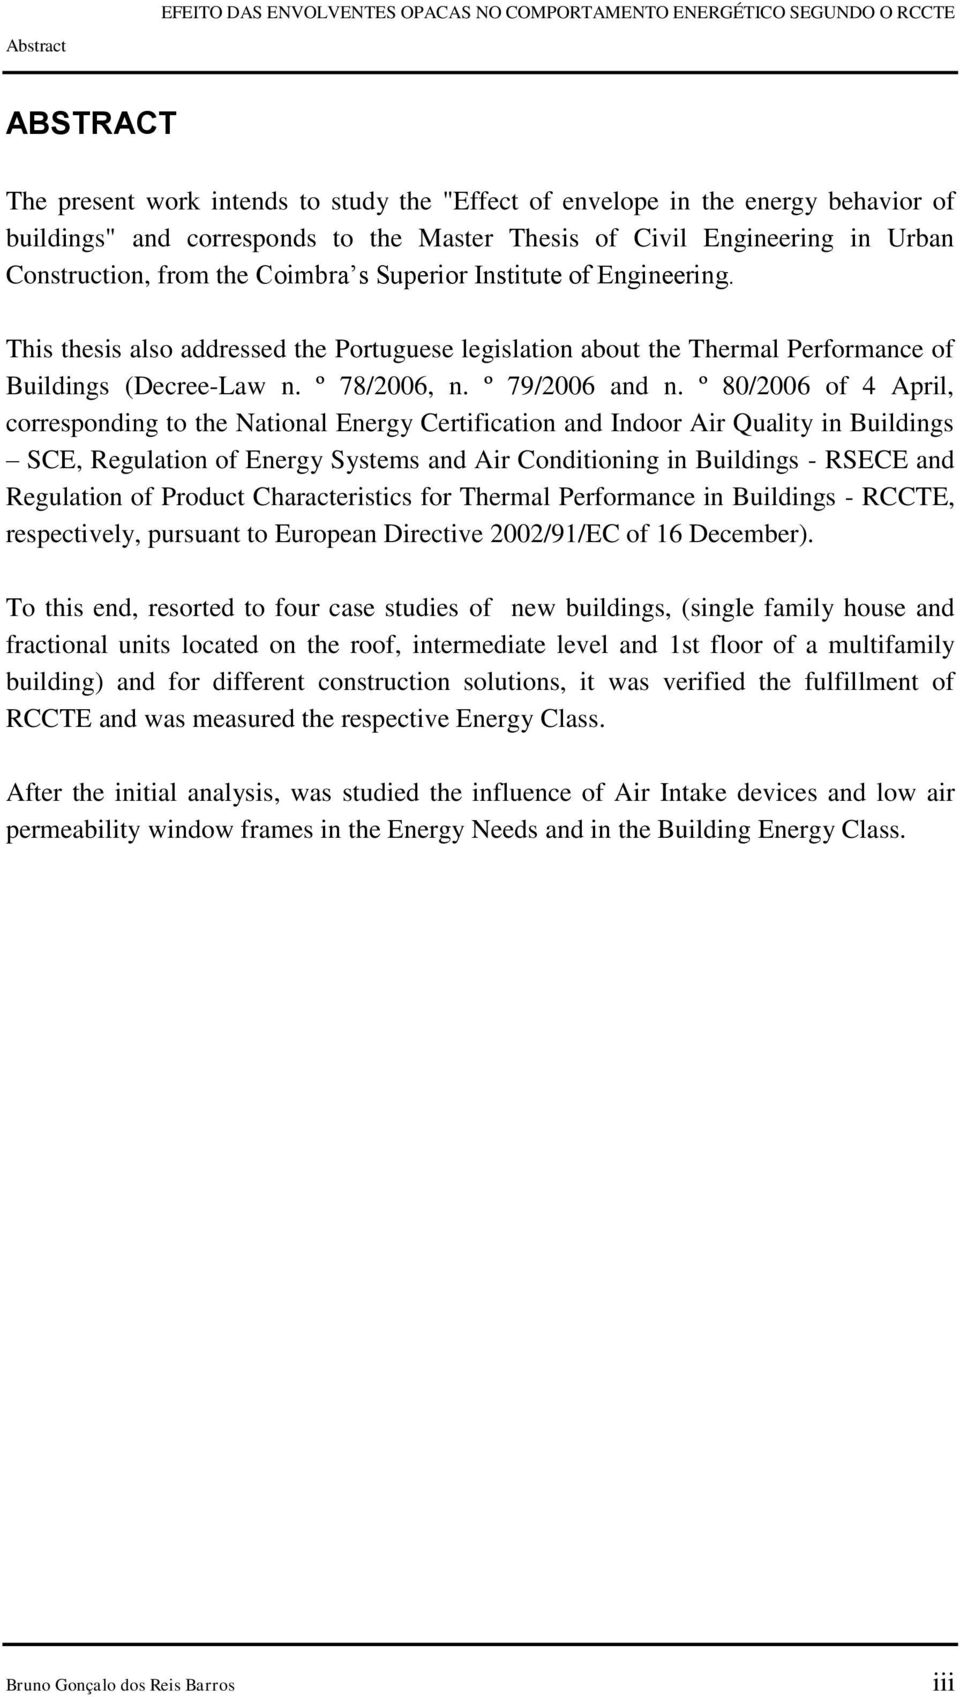 º 8/26 of 4 April, corresponding to the National Energy Certification and Indoor Air Quality in Buildings SCE, Regulation of Energy Systems and Air Conditioning in Buildings - RSECE and Regulation of